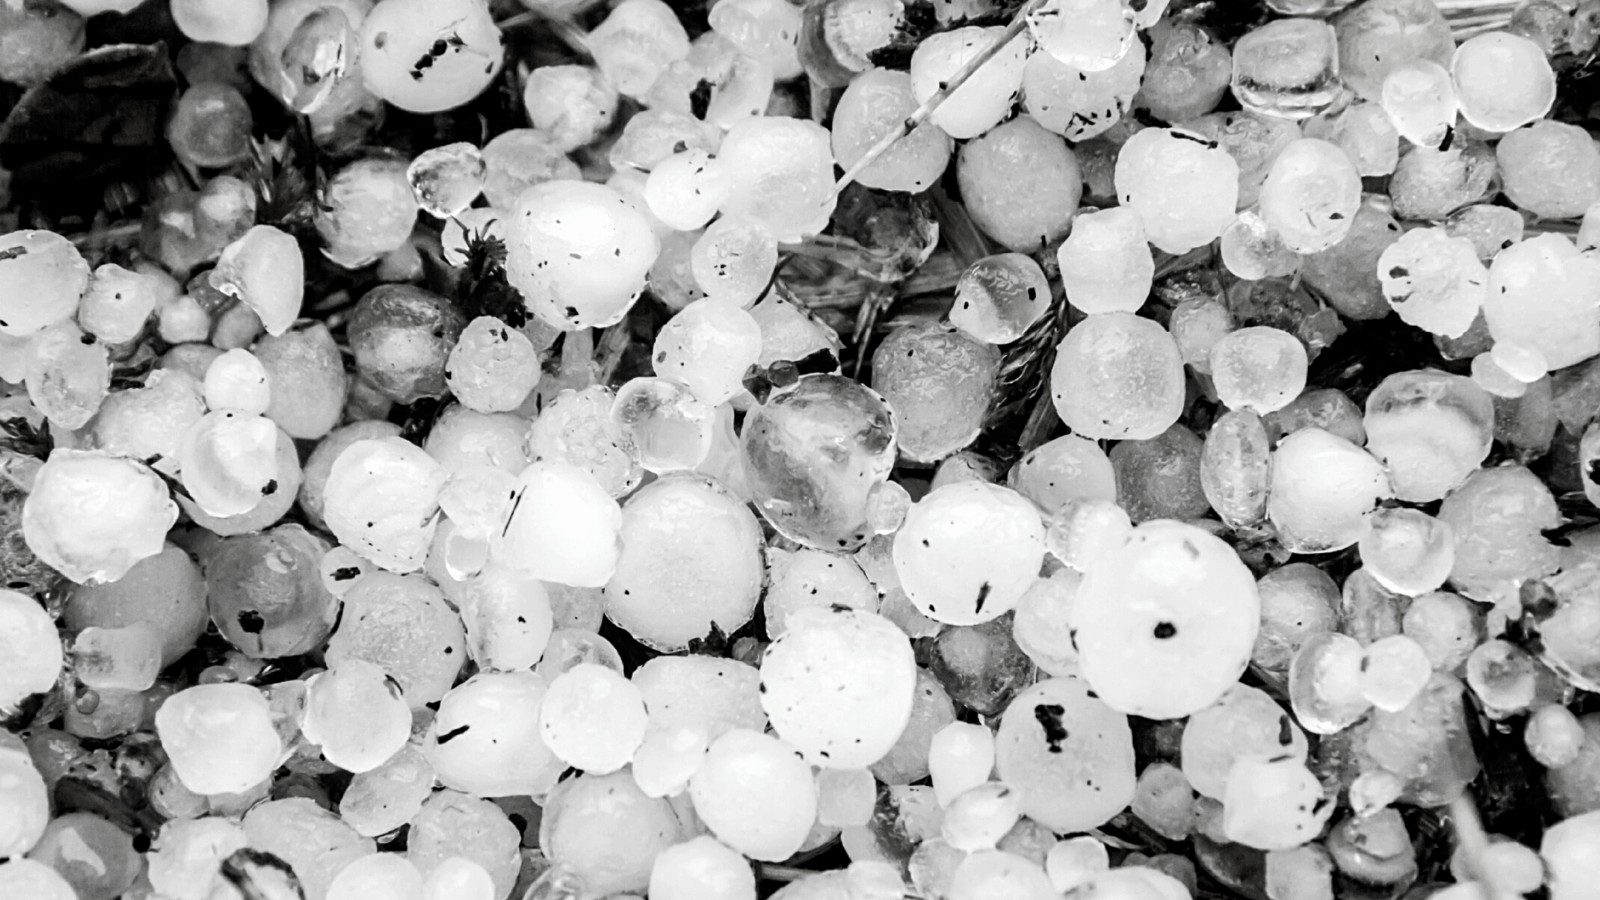 Welsh Study Explains How Climate Change Increases Hailstorms